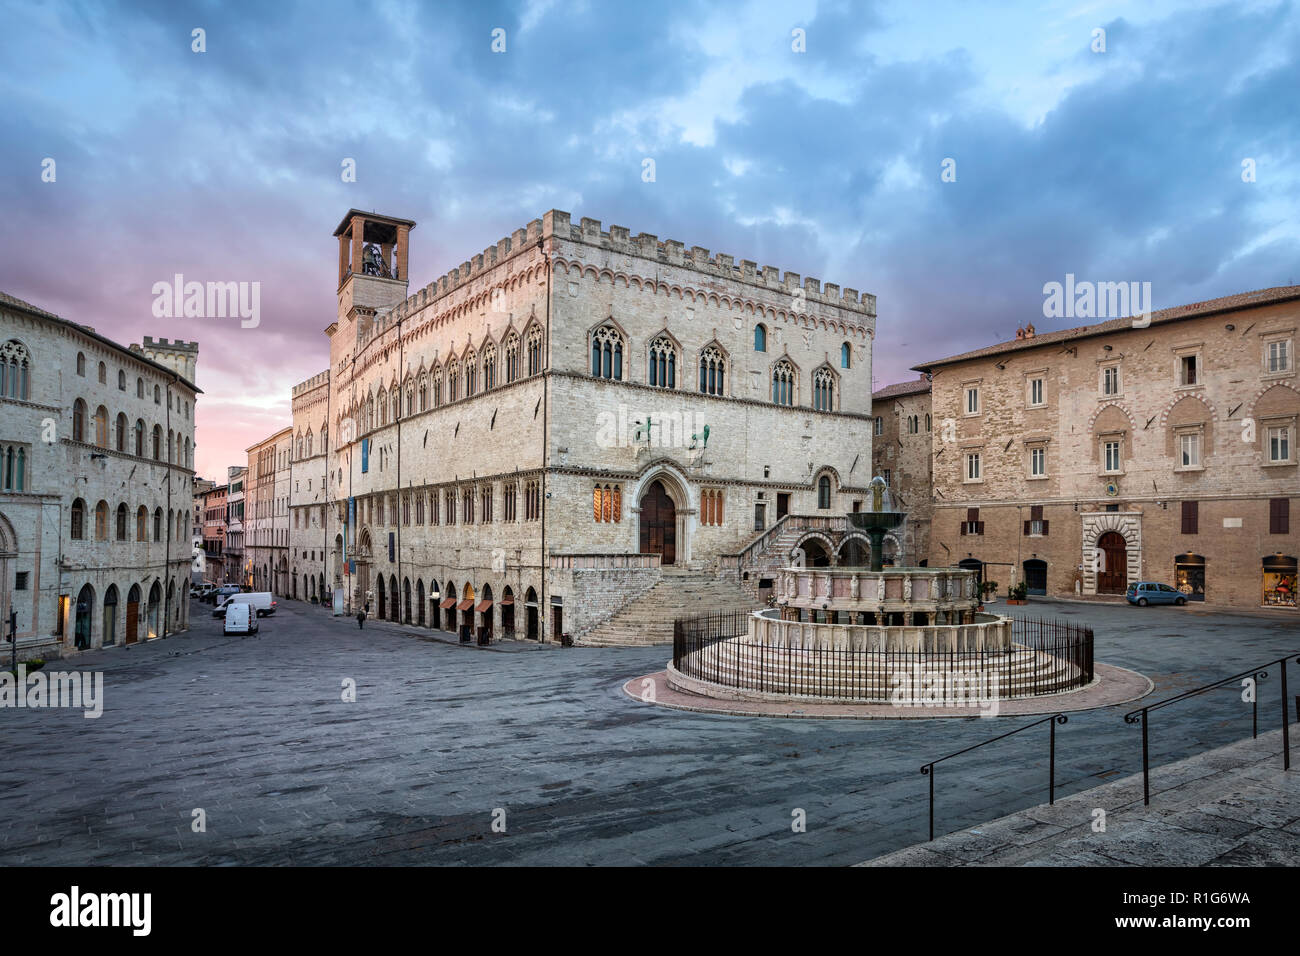 Perugia, Italy. Piazza IV Novembre on sunrise with Old Town Hall and monumental fountain Fontana Maggiore Stock Photo